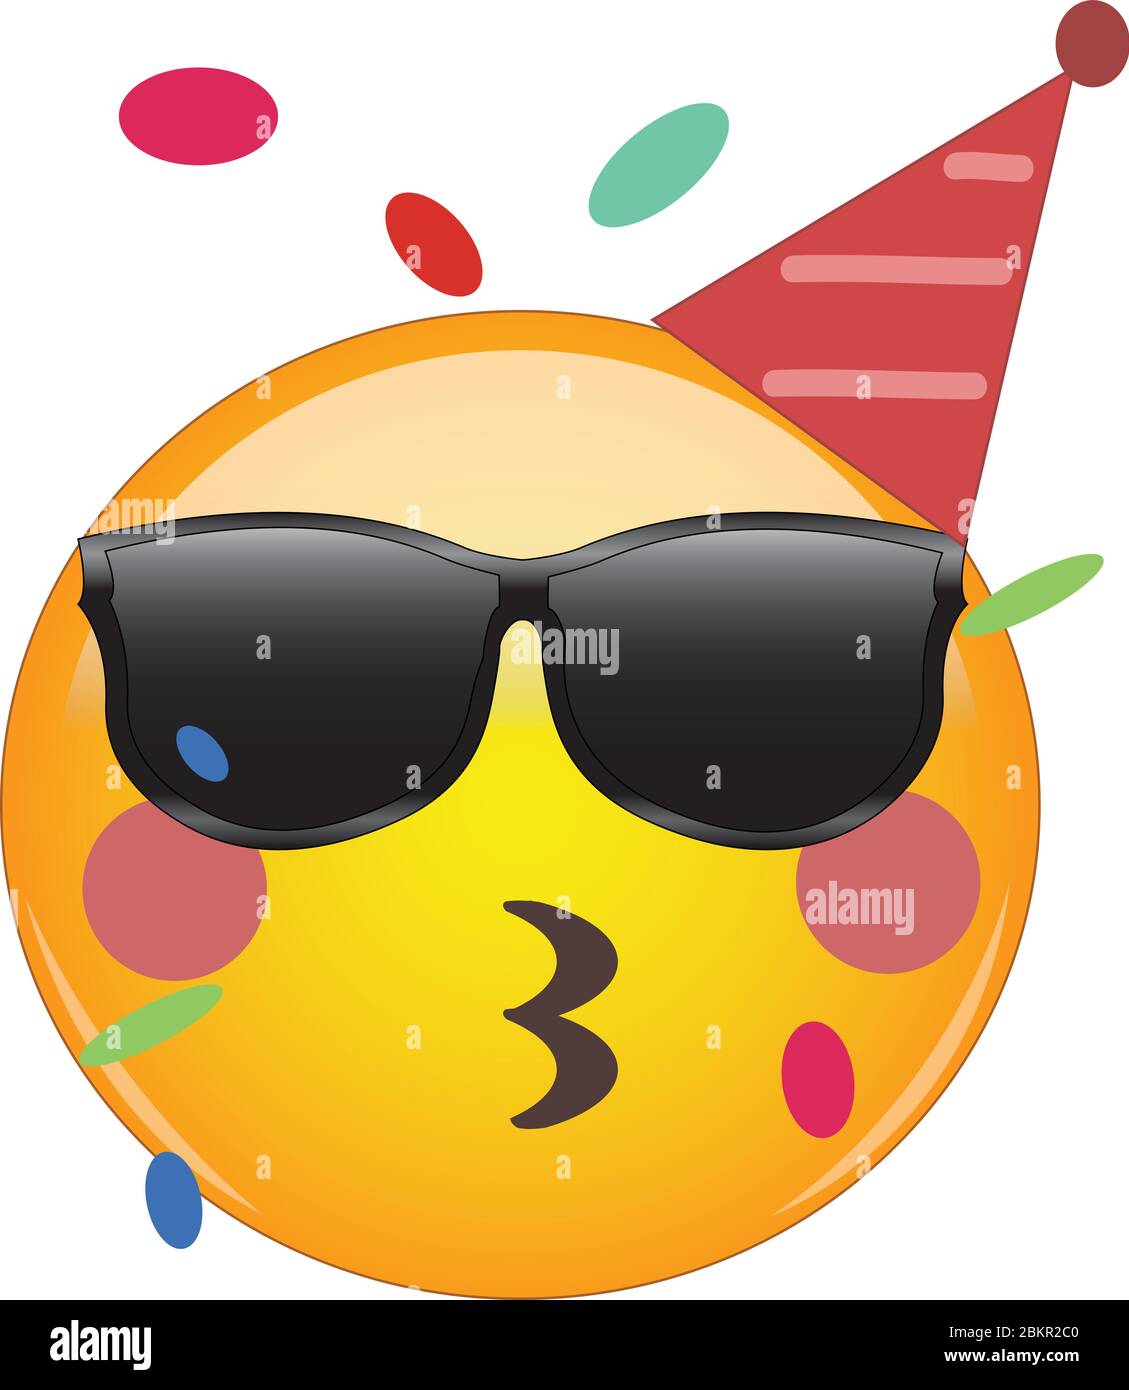 Cool party emoji celebrating birthday! Yellow face emoticon wearing shades and a party hat, kissing lips or whistling as confetti floats around its he Stock Vector